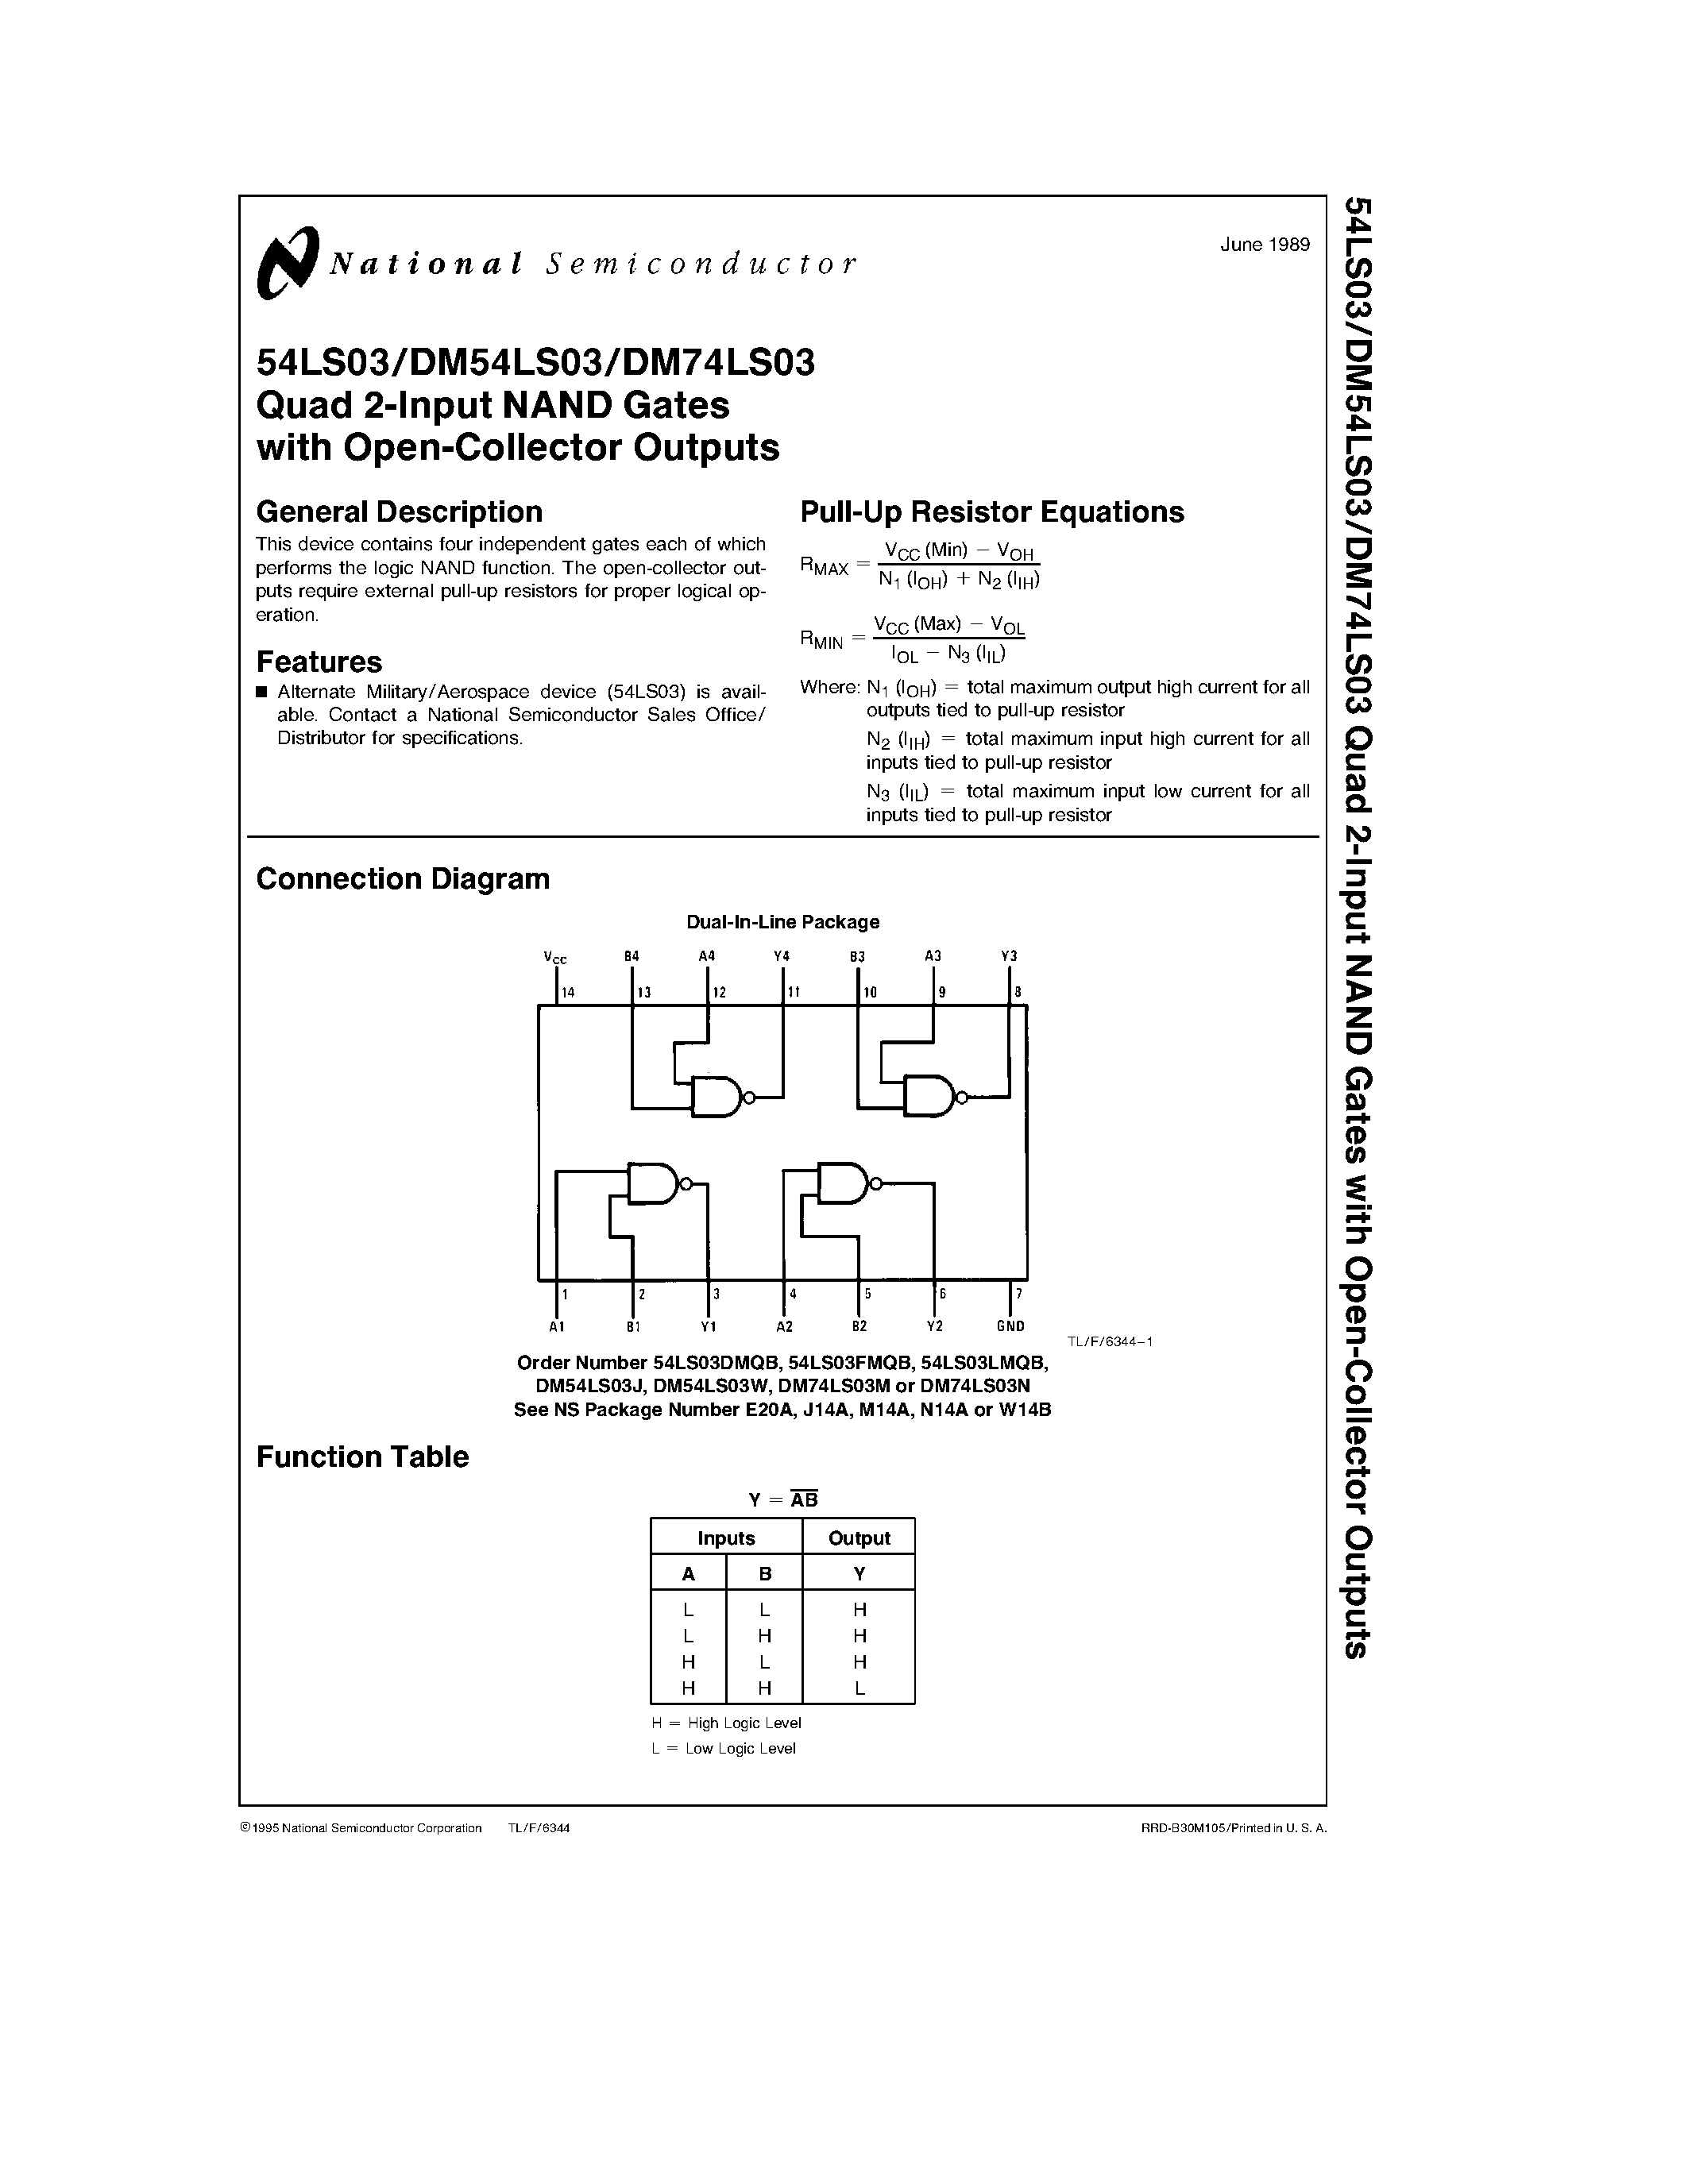 Даташит 54LS03 - Quad 2-Input NAND Gates with Open-Collector Outputs страница 1